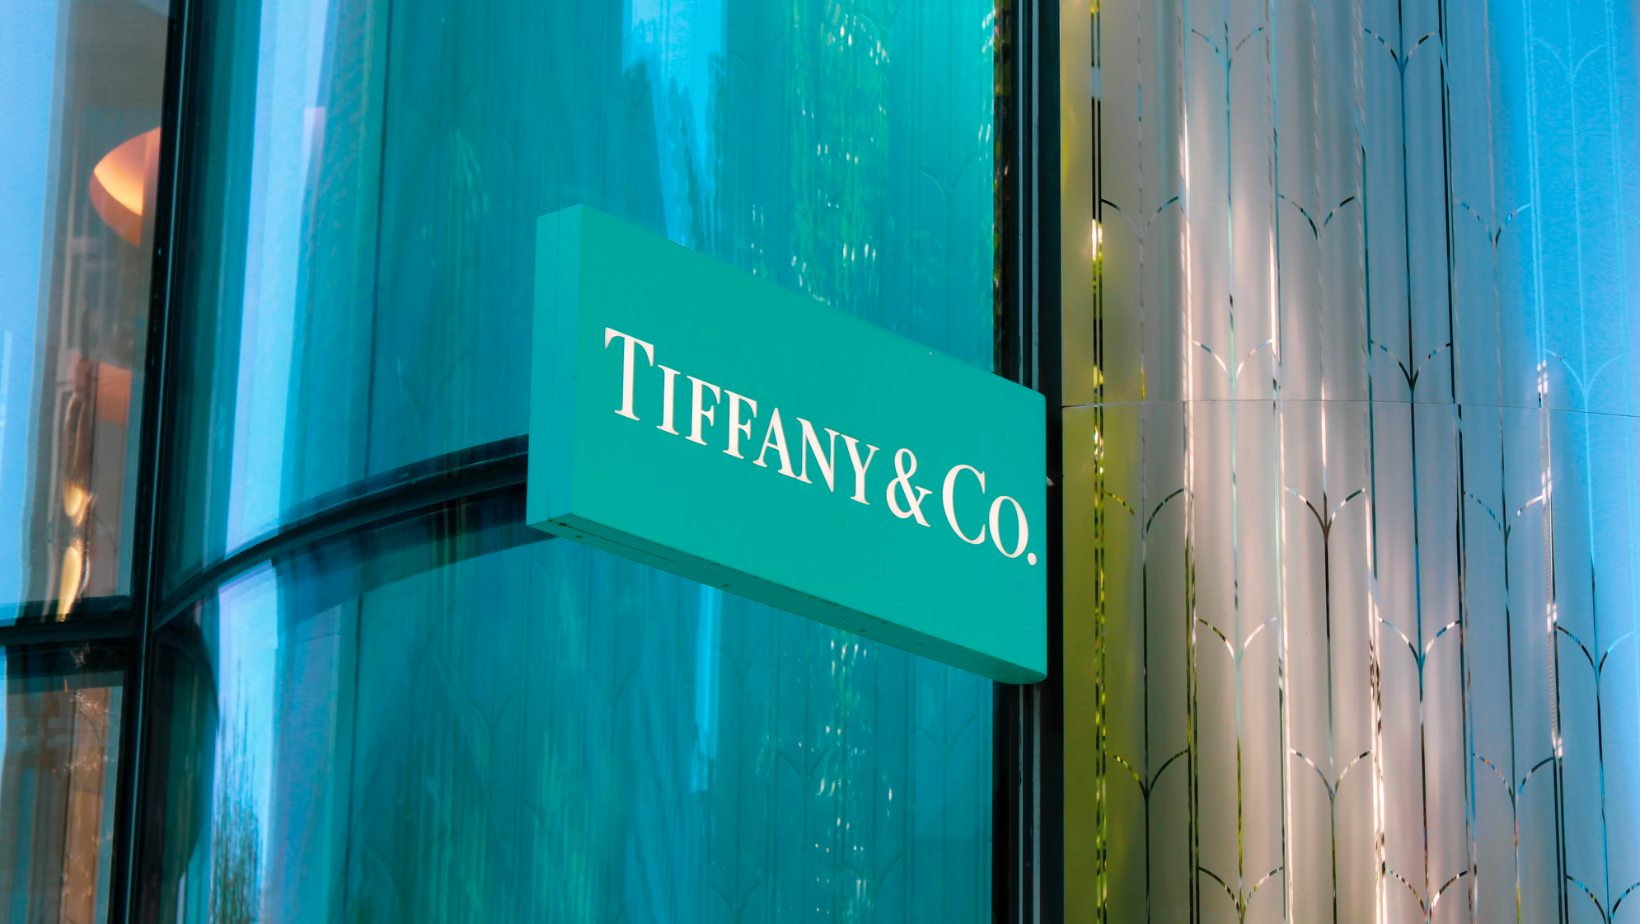 A Tiffany & Co. x Nike Collab is Rumored for 2023 – DBLTKE